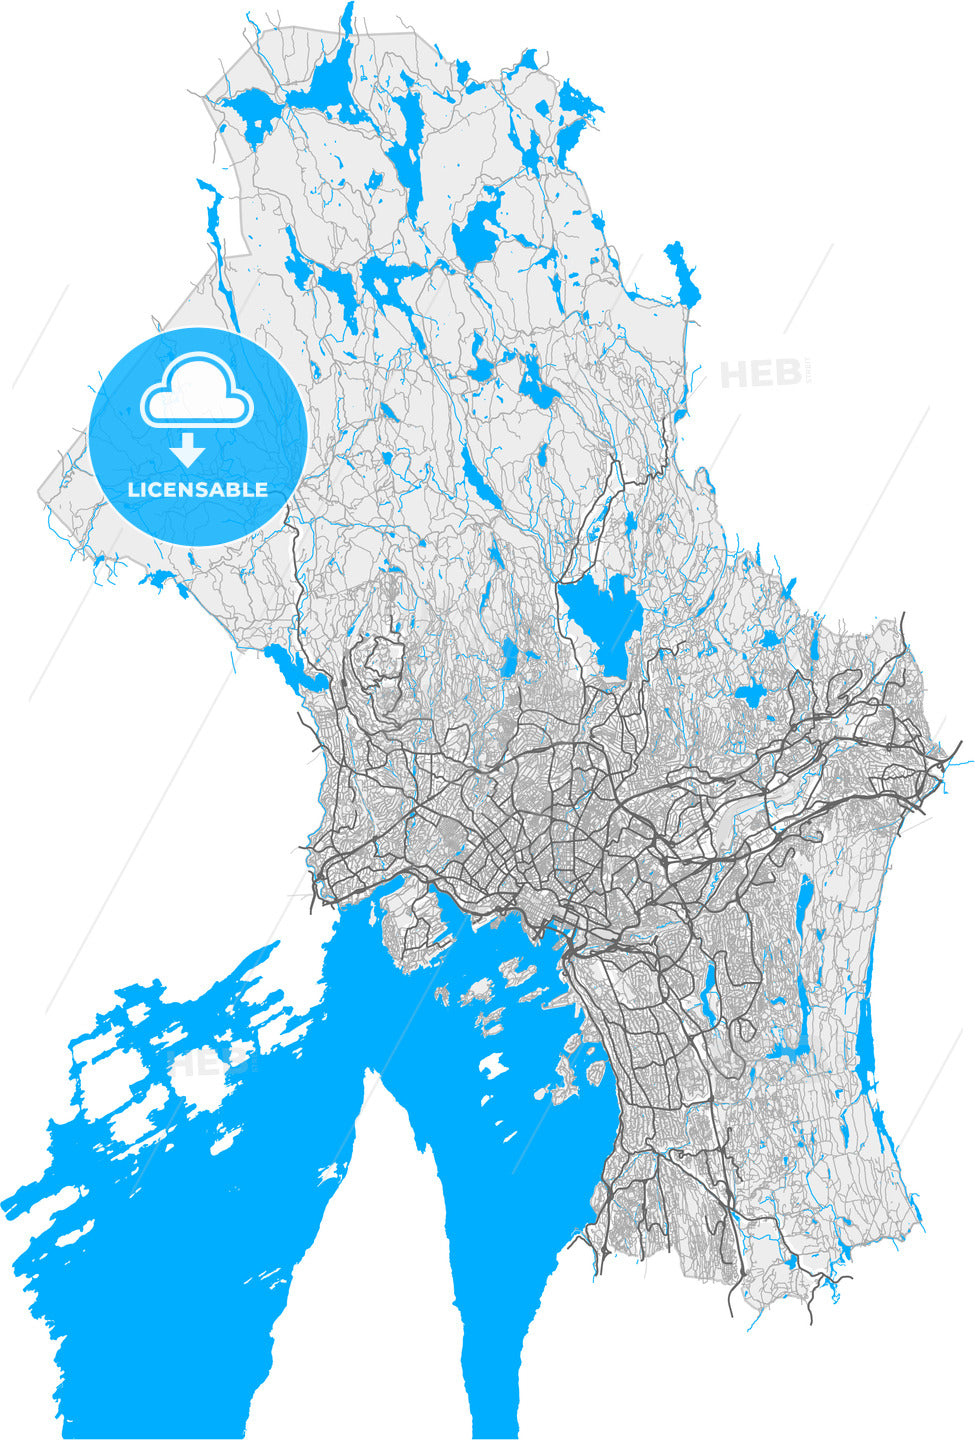 Oslo, Oslo, Norway, high quality vector map